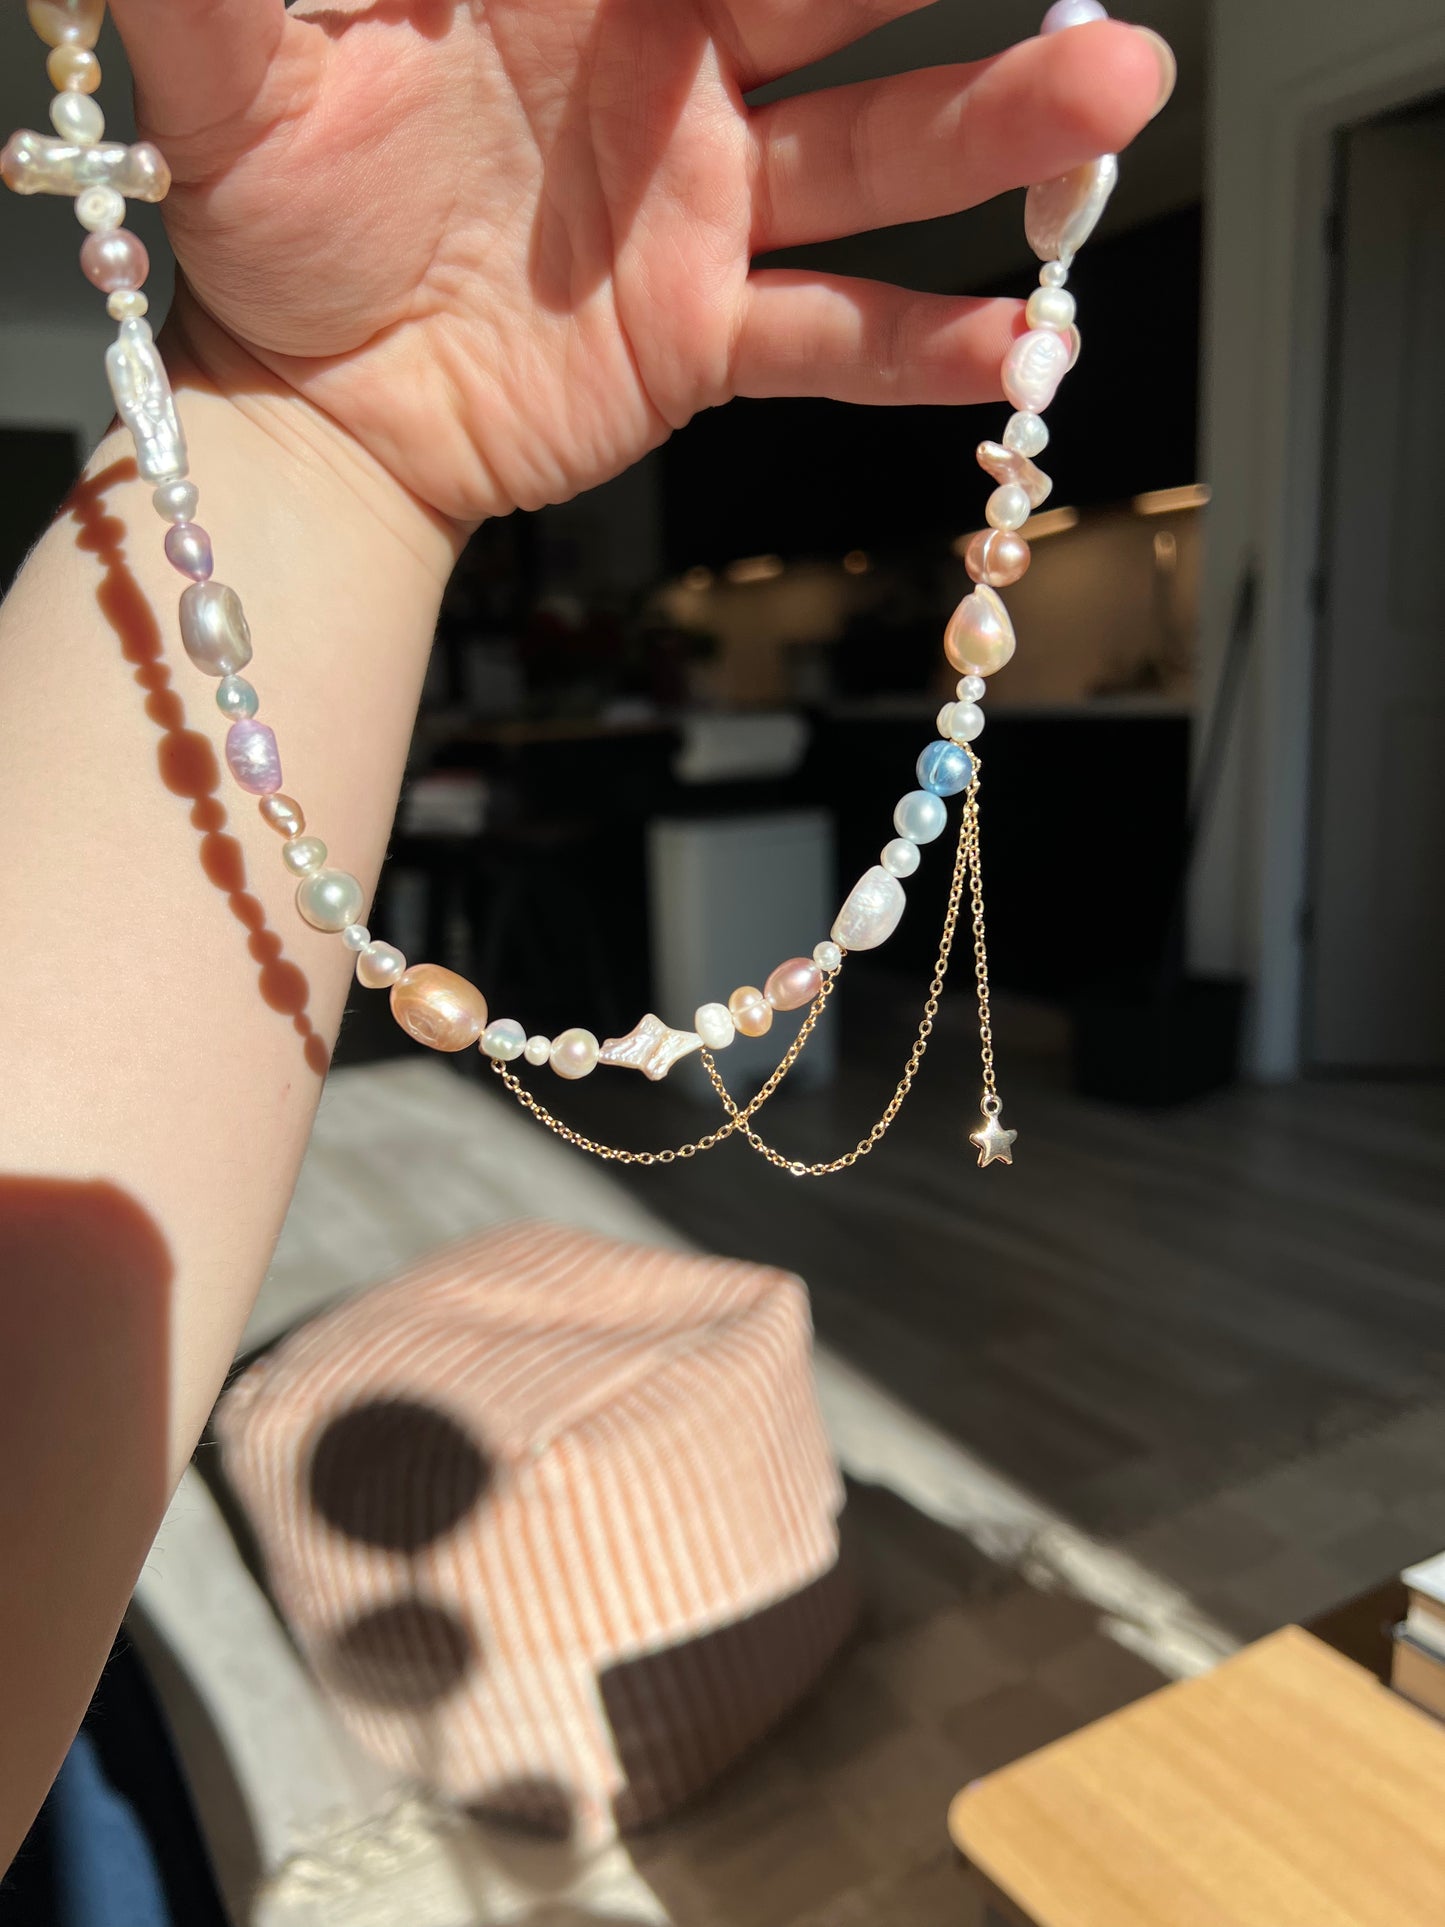 Not your grandma's pearls